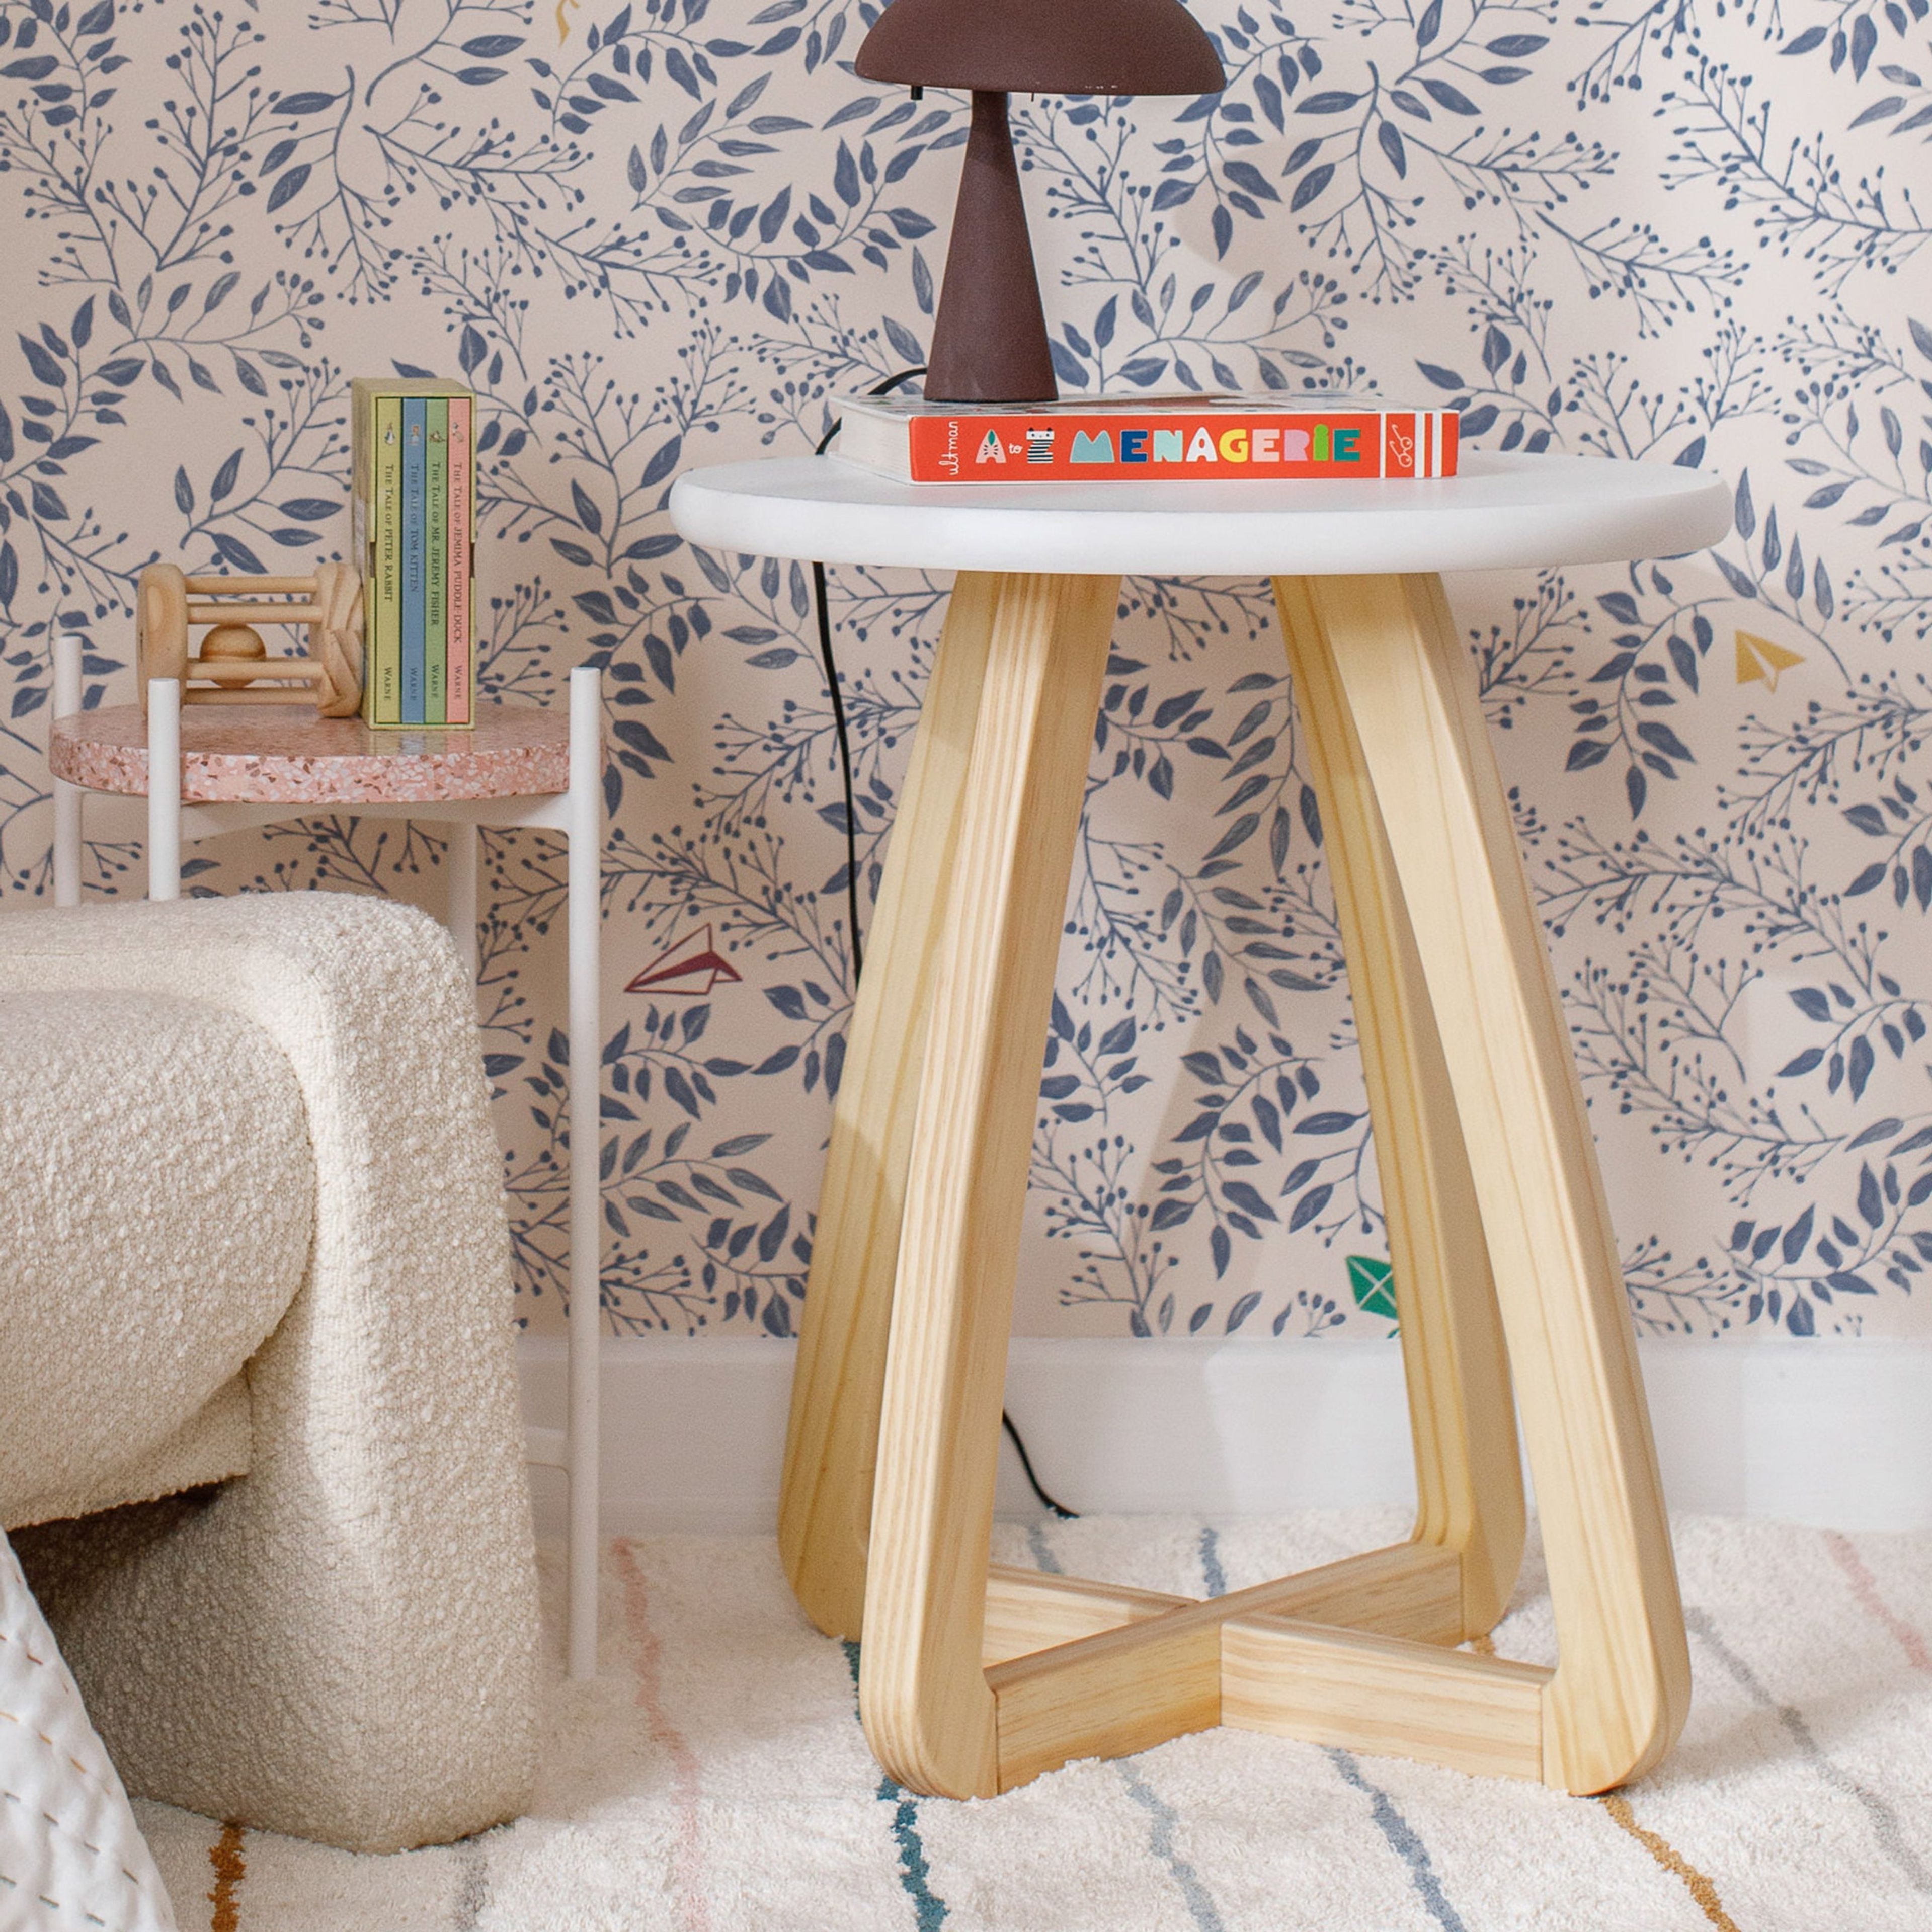 The Criss Cross Side Table